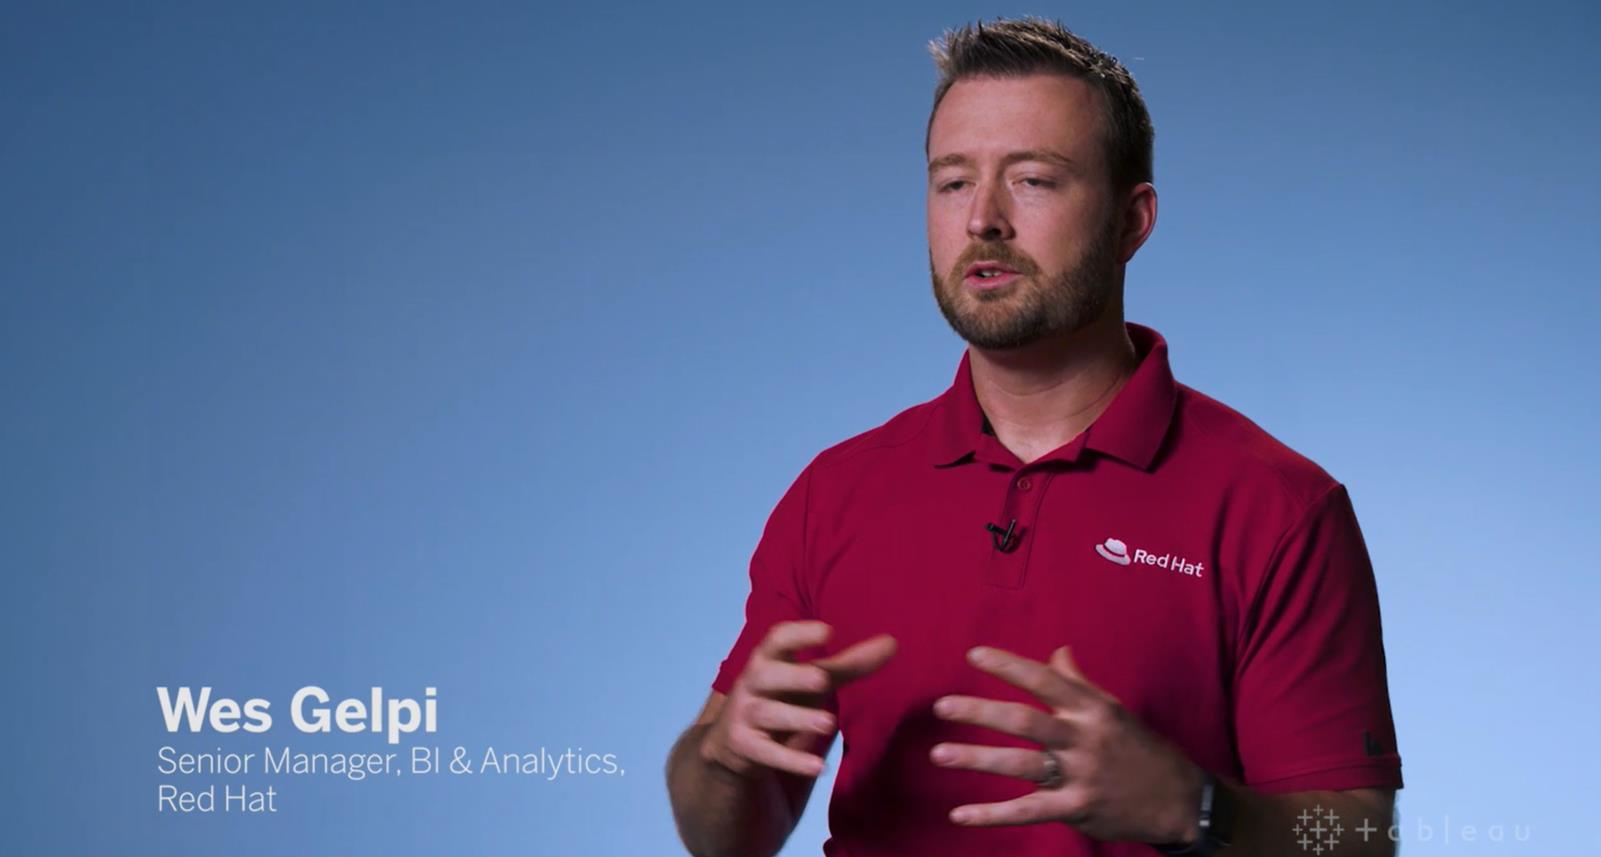 Red Hat embraces Tableau Blueprint and Tableau Cloud, deepens data culture with 4,500+ staff in less than a year